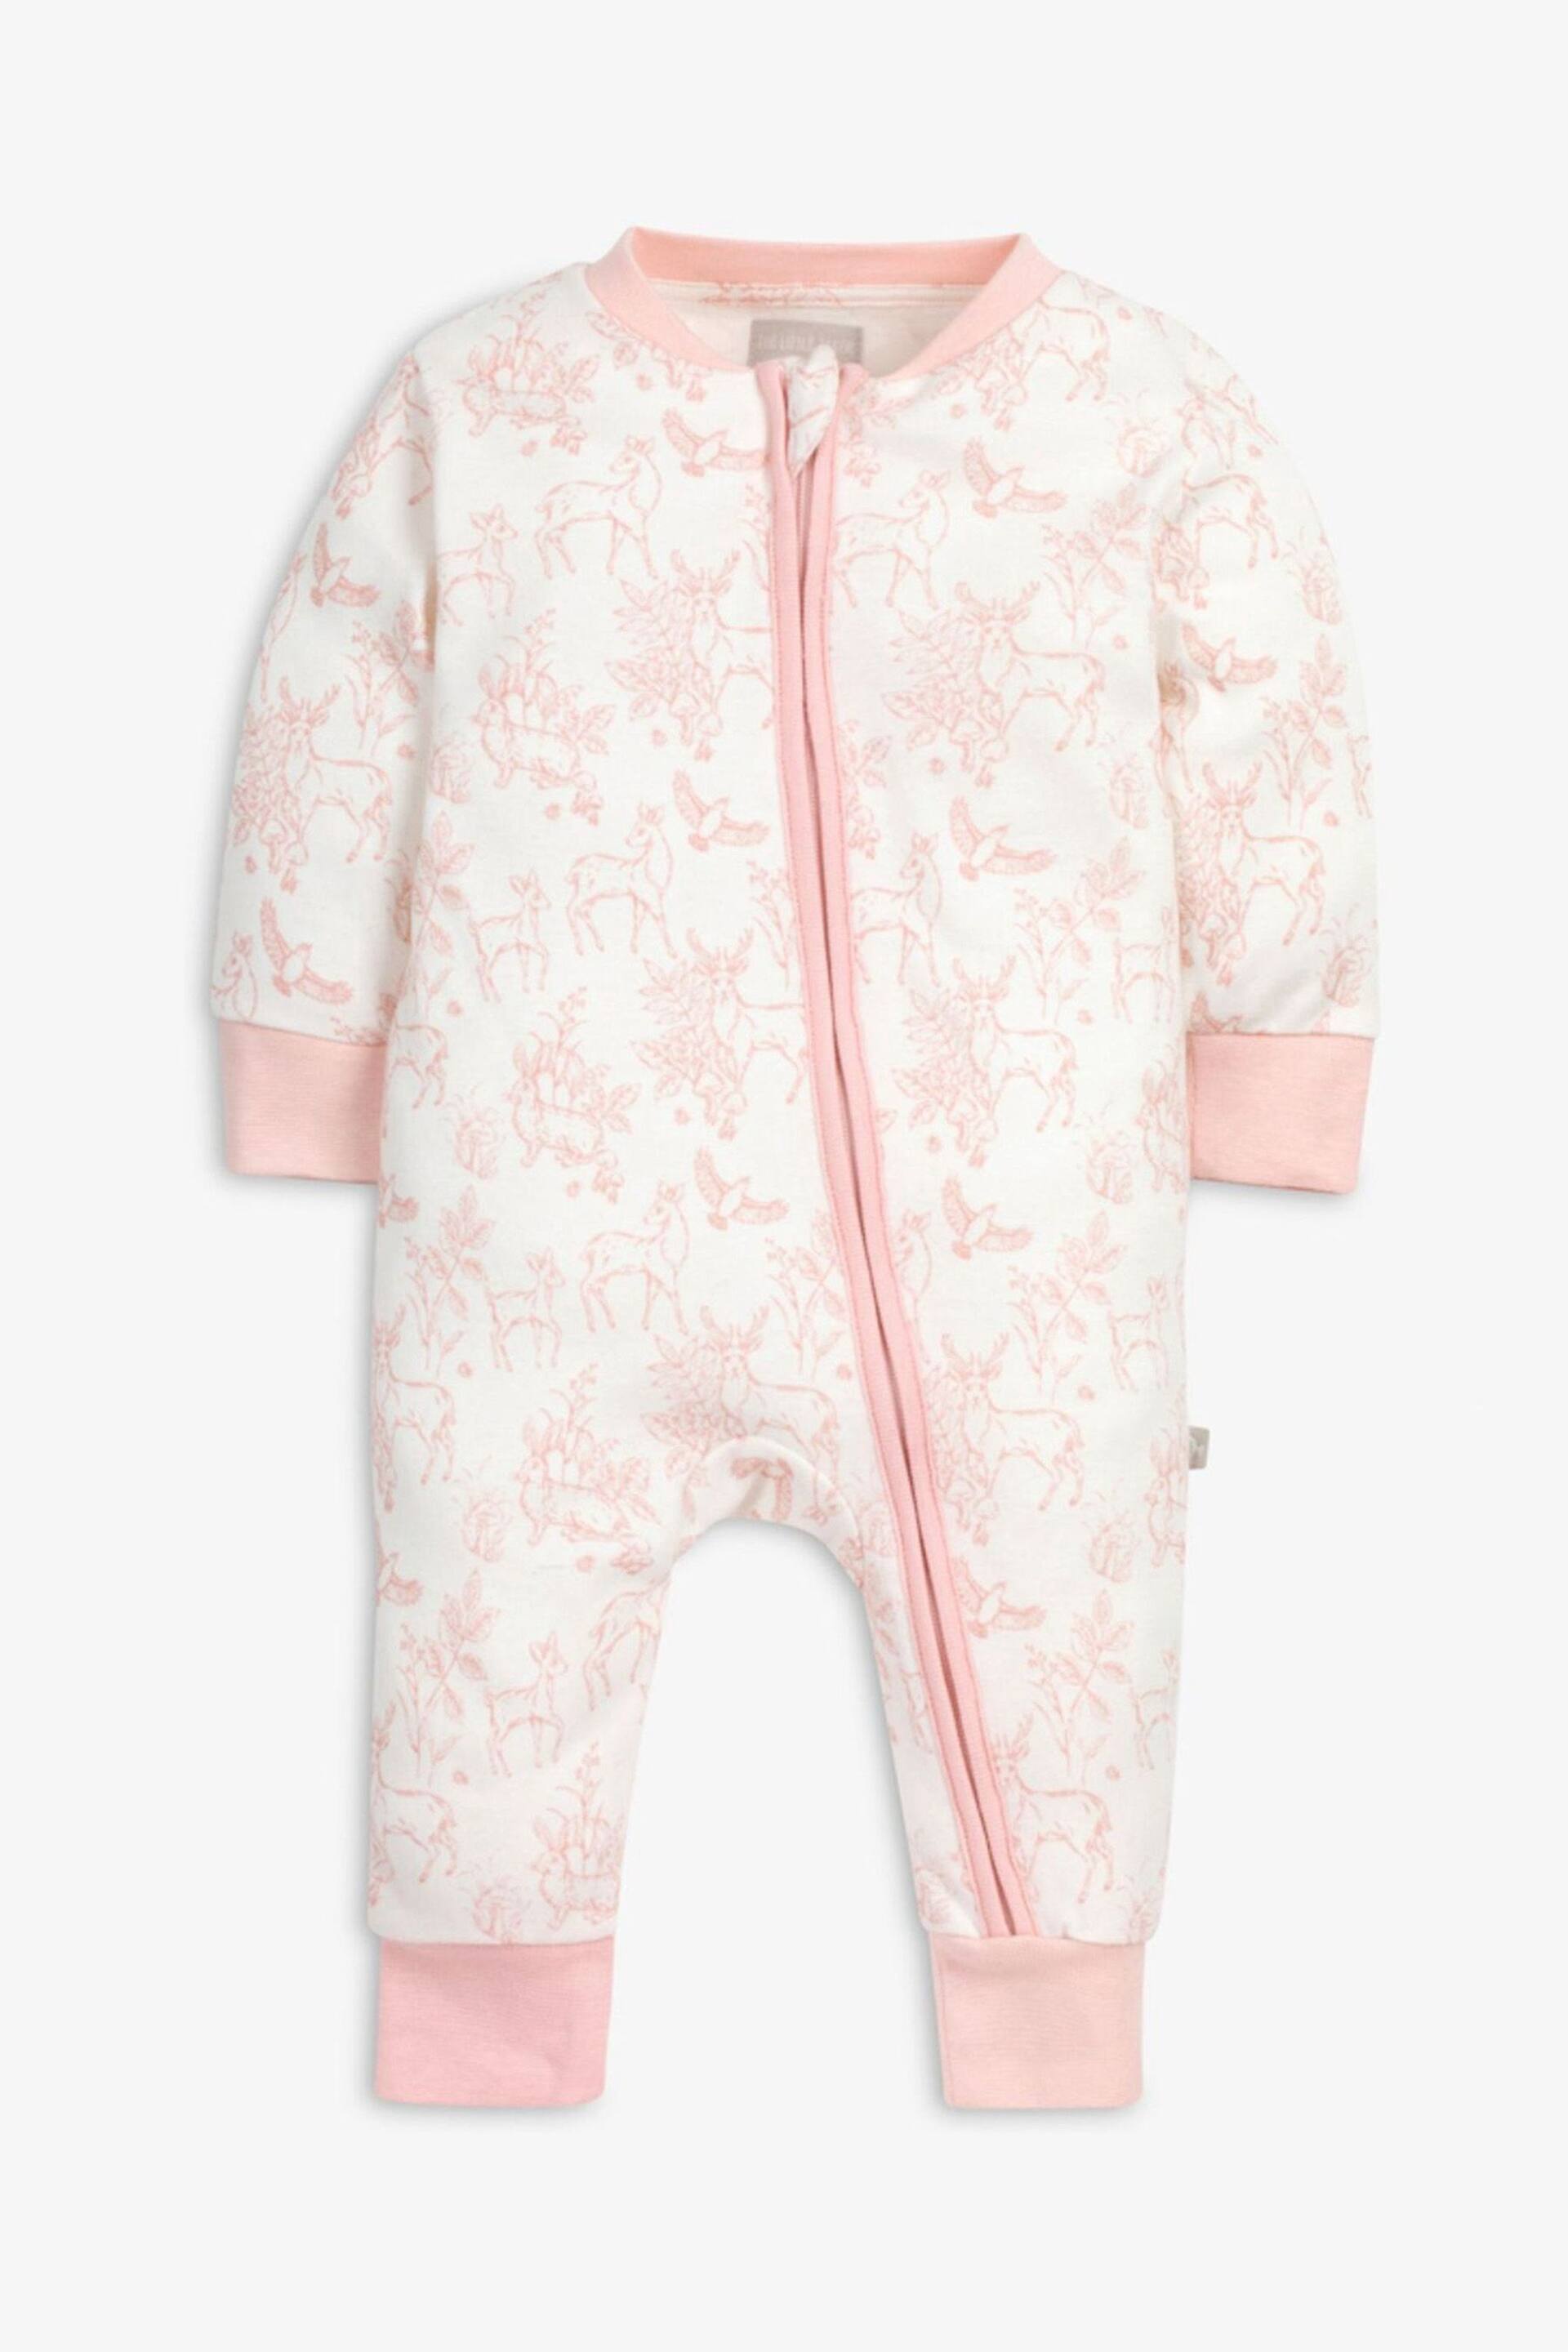 The Little Tailor Baby Front Zip Easter Bunny Print Soft Cotton Sleepsuit - Image 2 of 5